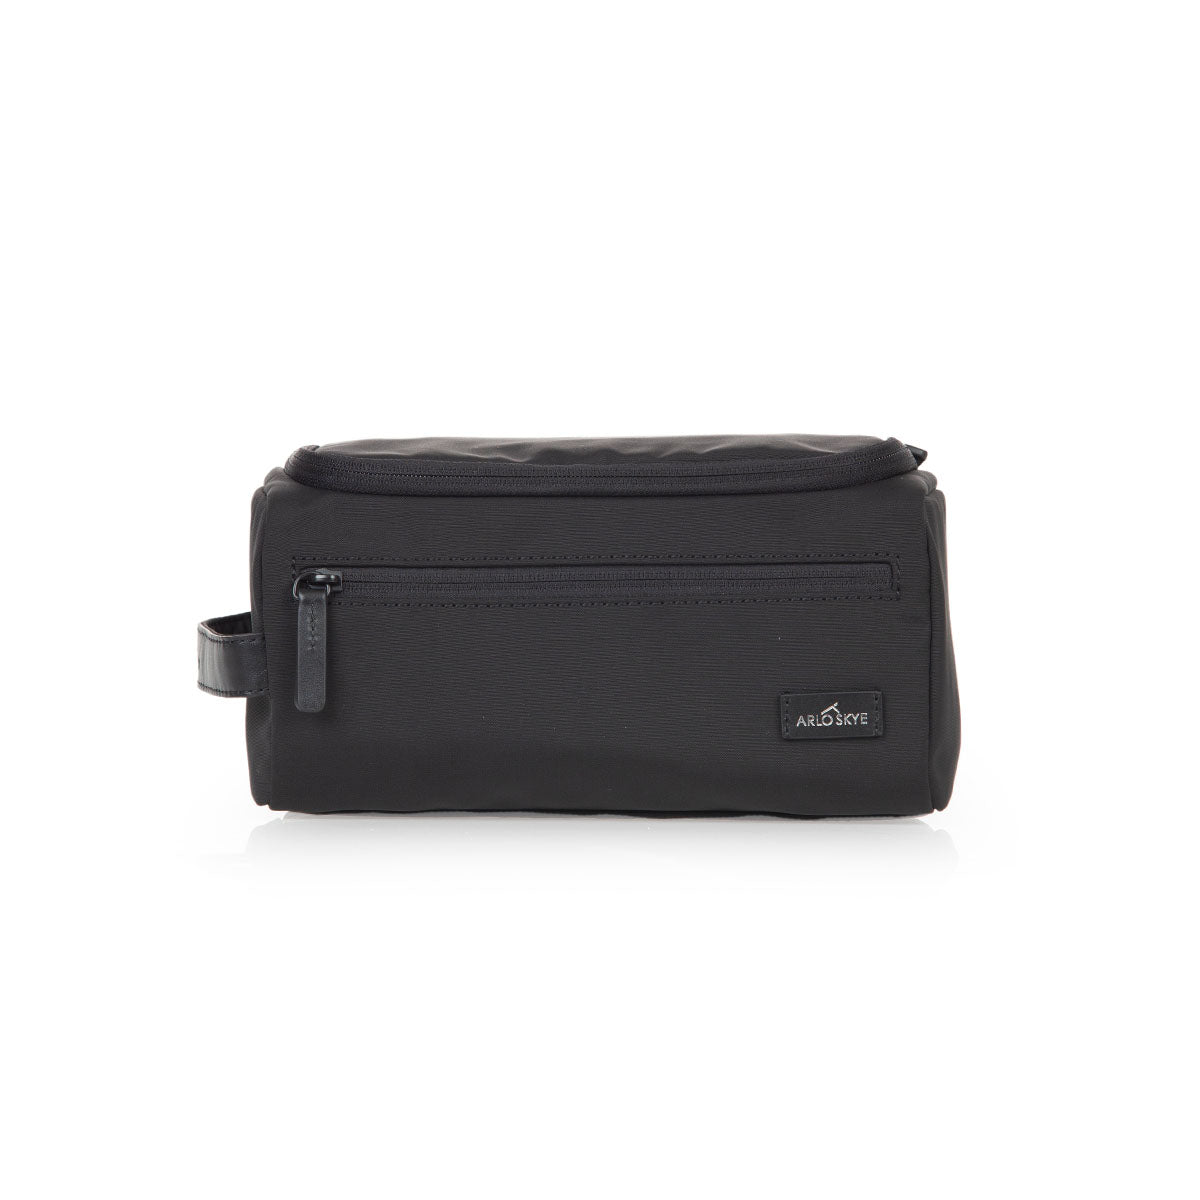 toiletry bag in black color showing exterior closed view.